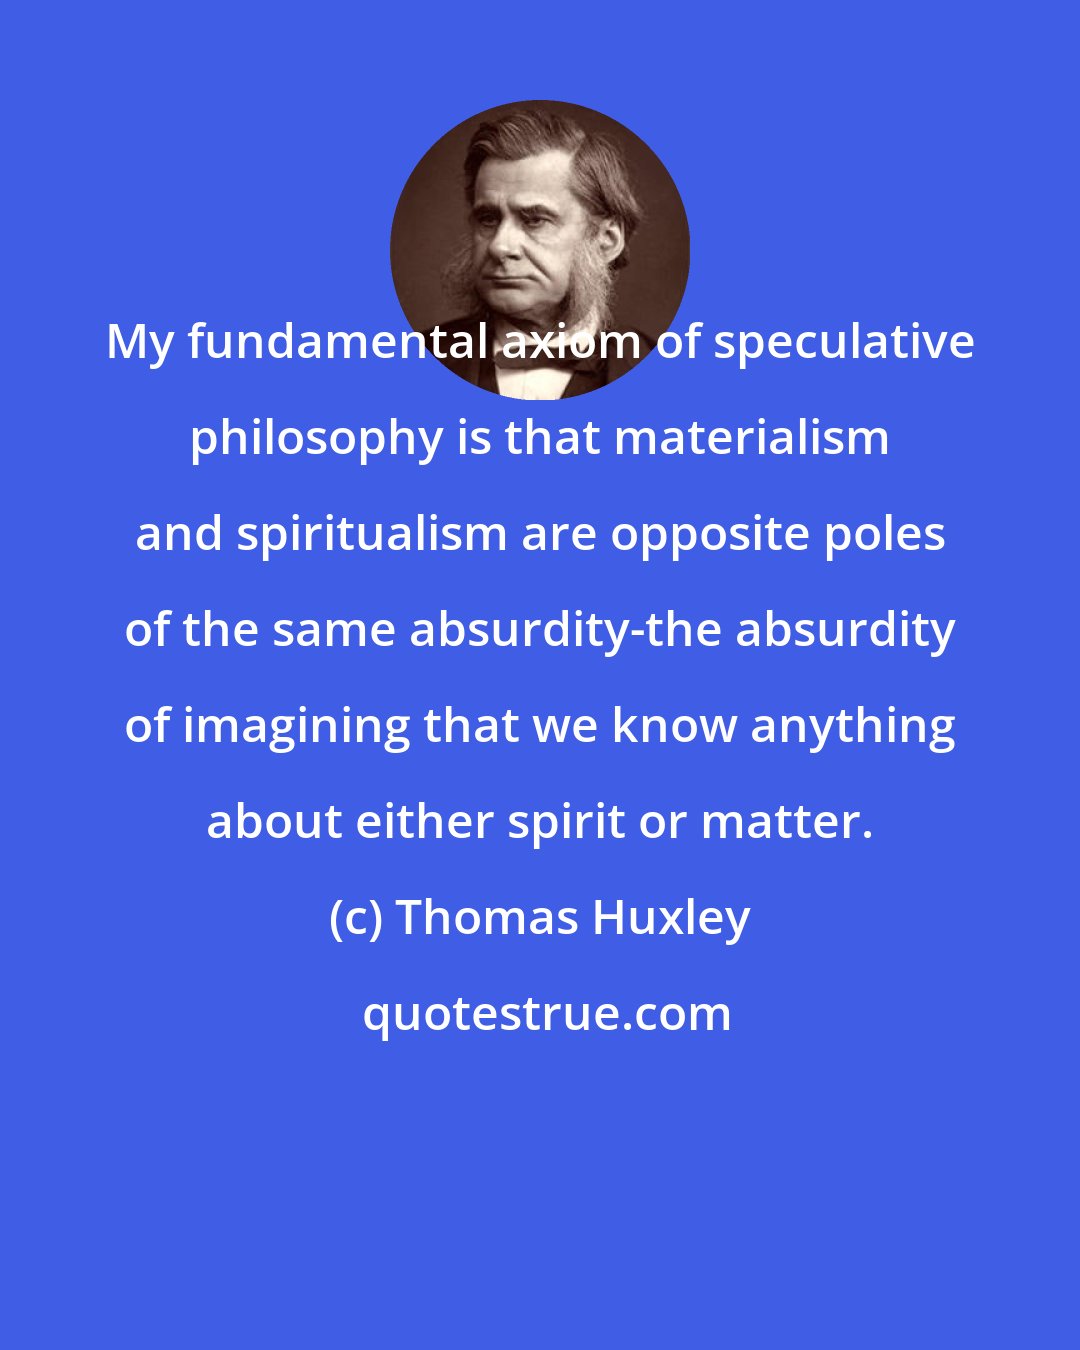 Thomas Huxley: My fundamental axiom of speculative philosophy is that materialism and spiritualism are opposite poles of the same absurdity-the absurdity of imagining that we know anything about either spirit or matter.